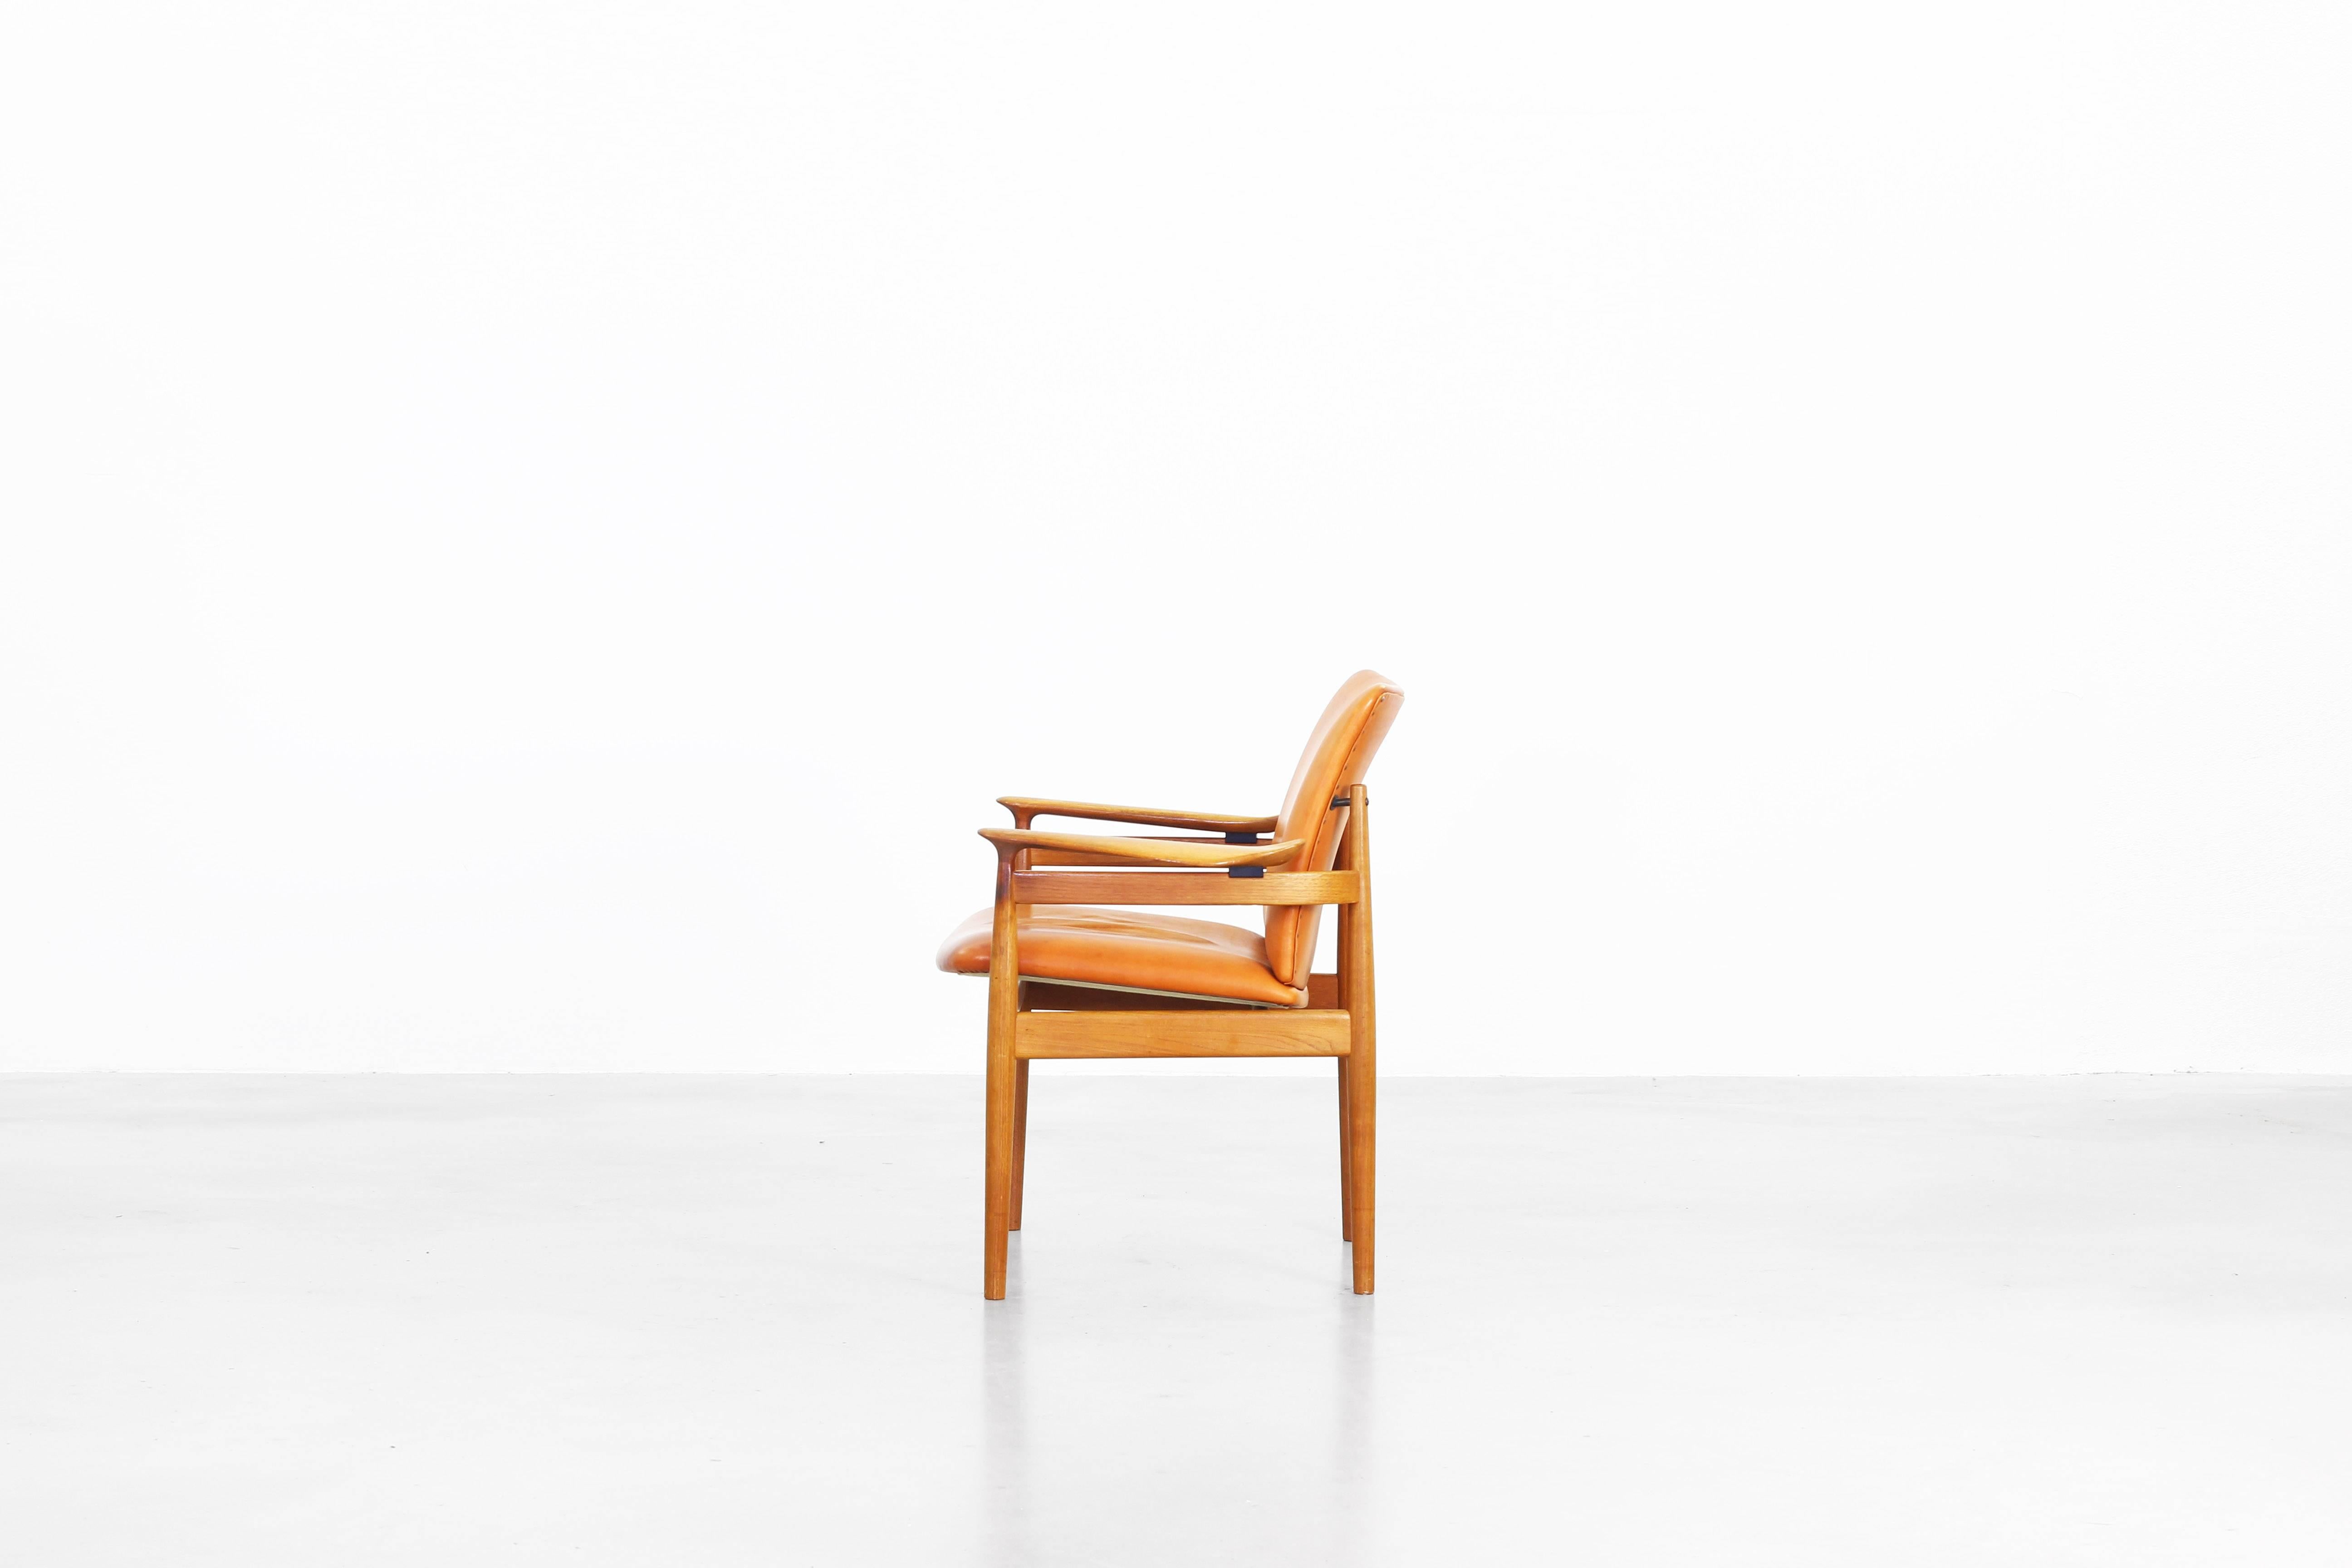 Very beautiful armchair designed by Finn Juhl for France and Daverkosen in 1963, made in Denmark. The armchair comes with a beautifully patinated brown-cognac leather and the frame is made of teak wood. Still in an original condition, labelled on